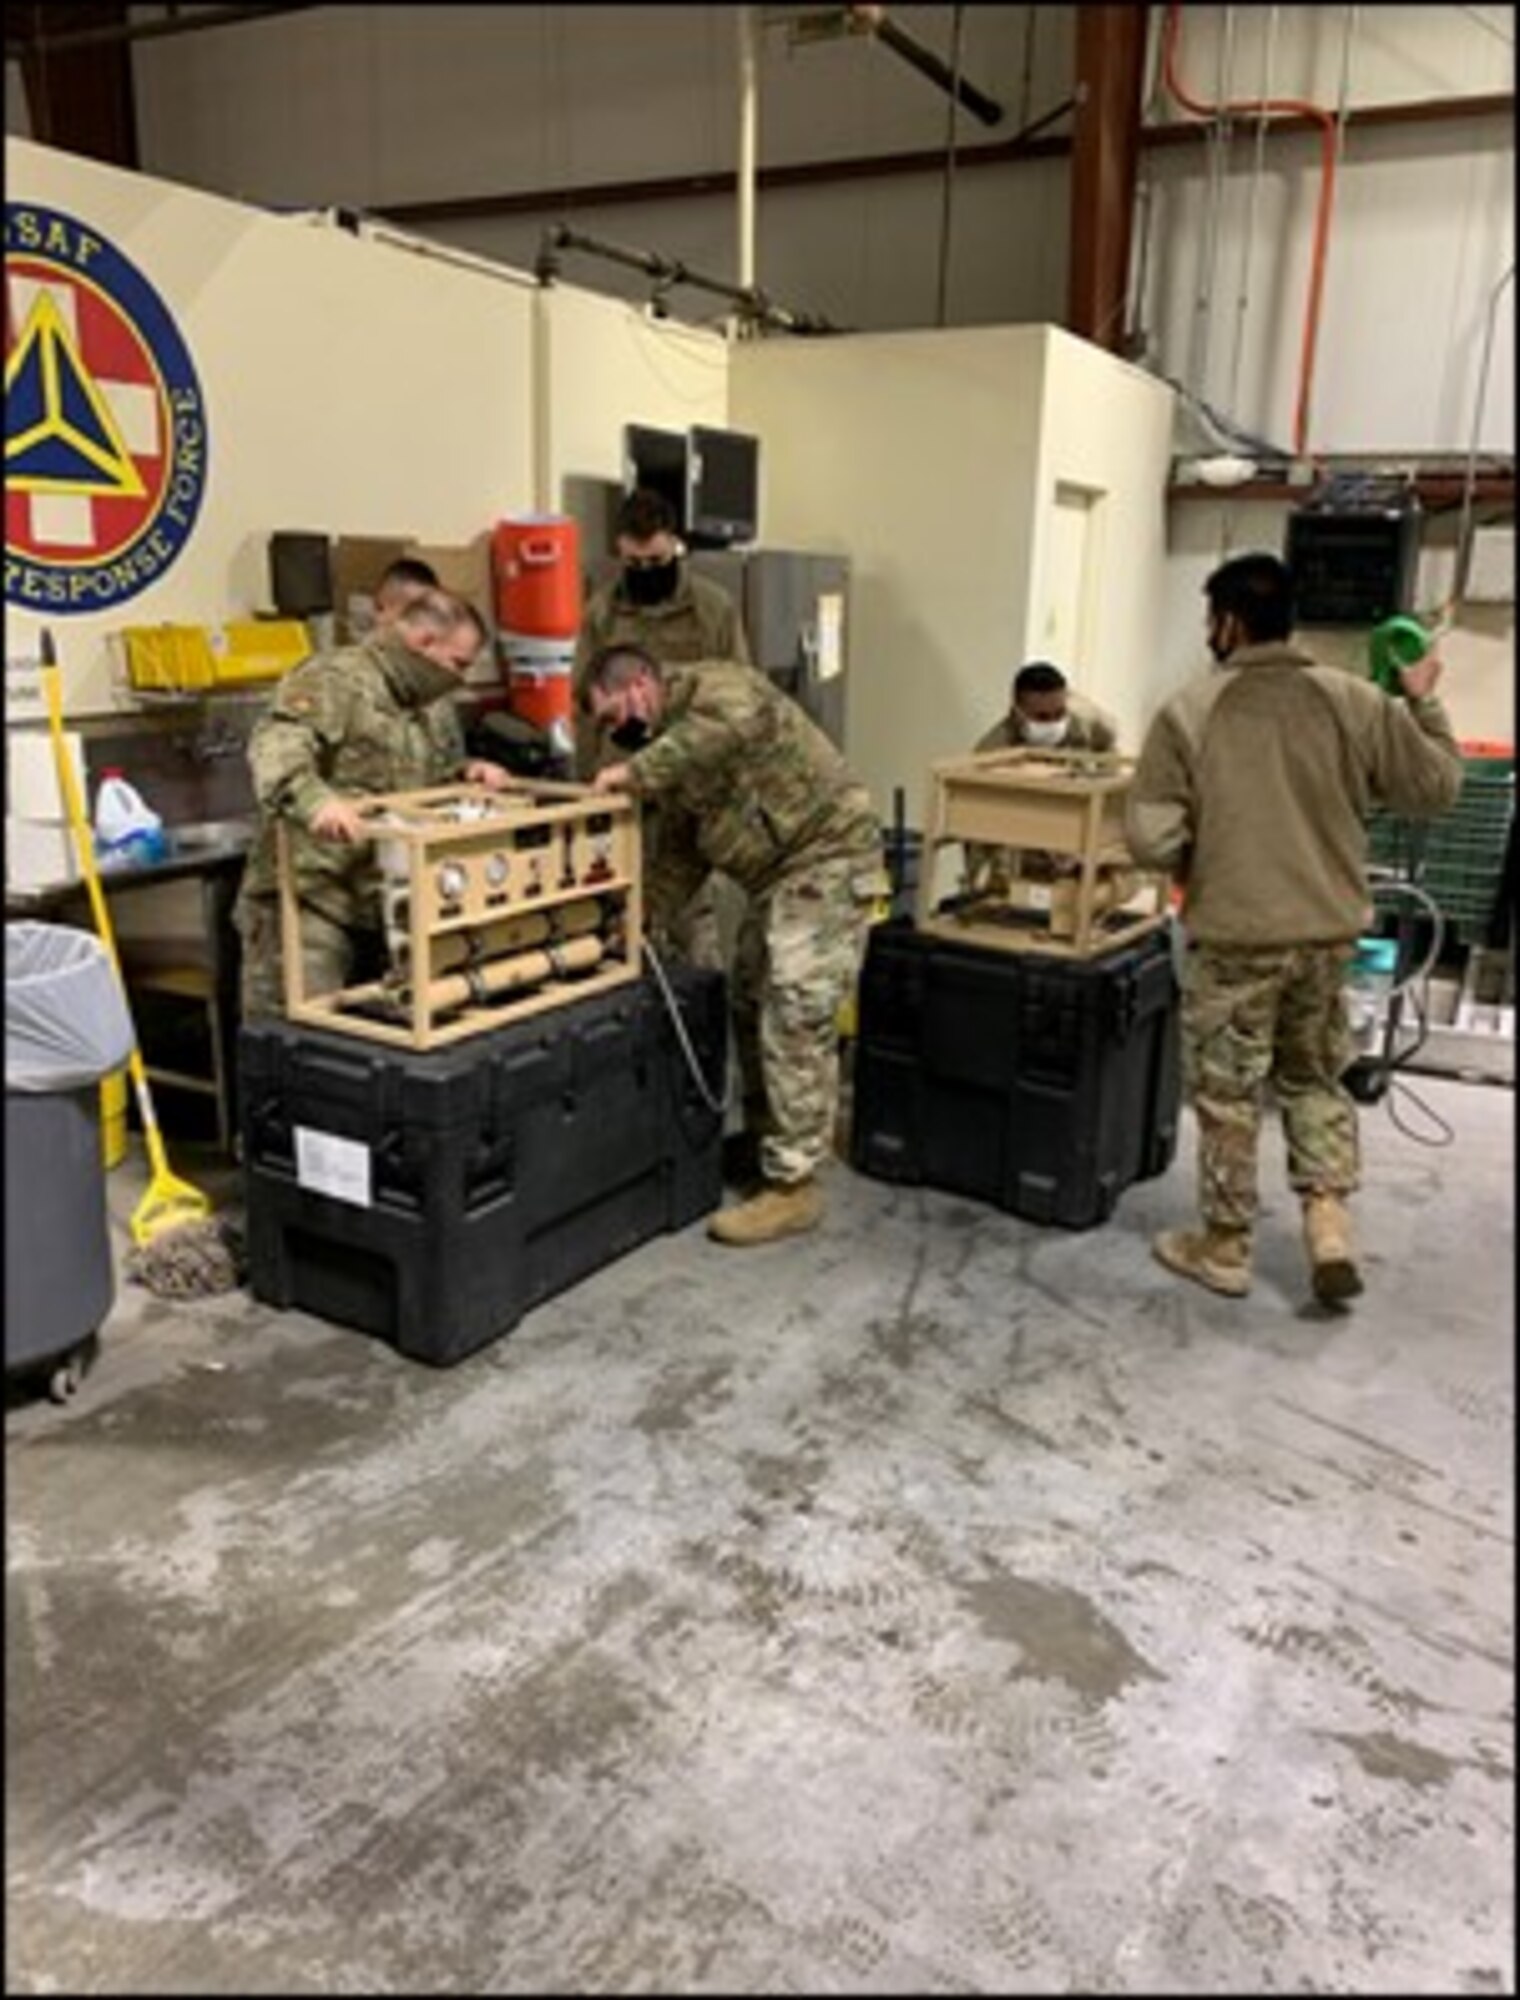 Members of the Water and Fuels Team demonstrate the capabilities of the Platoon Water Purification System during a training event held at Mountain Home Air Force Base, Jan. 27, 2021.The PWPS has the capability to purify up to 20 gallons per hour from typically non-potable water sources.